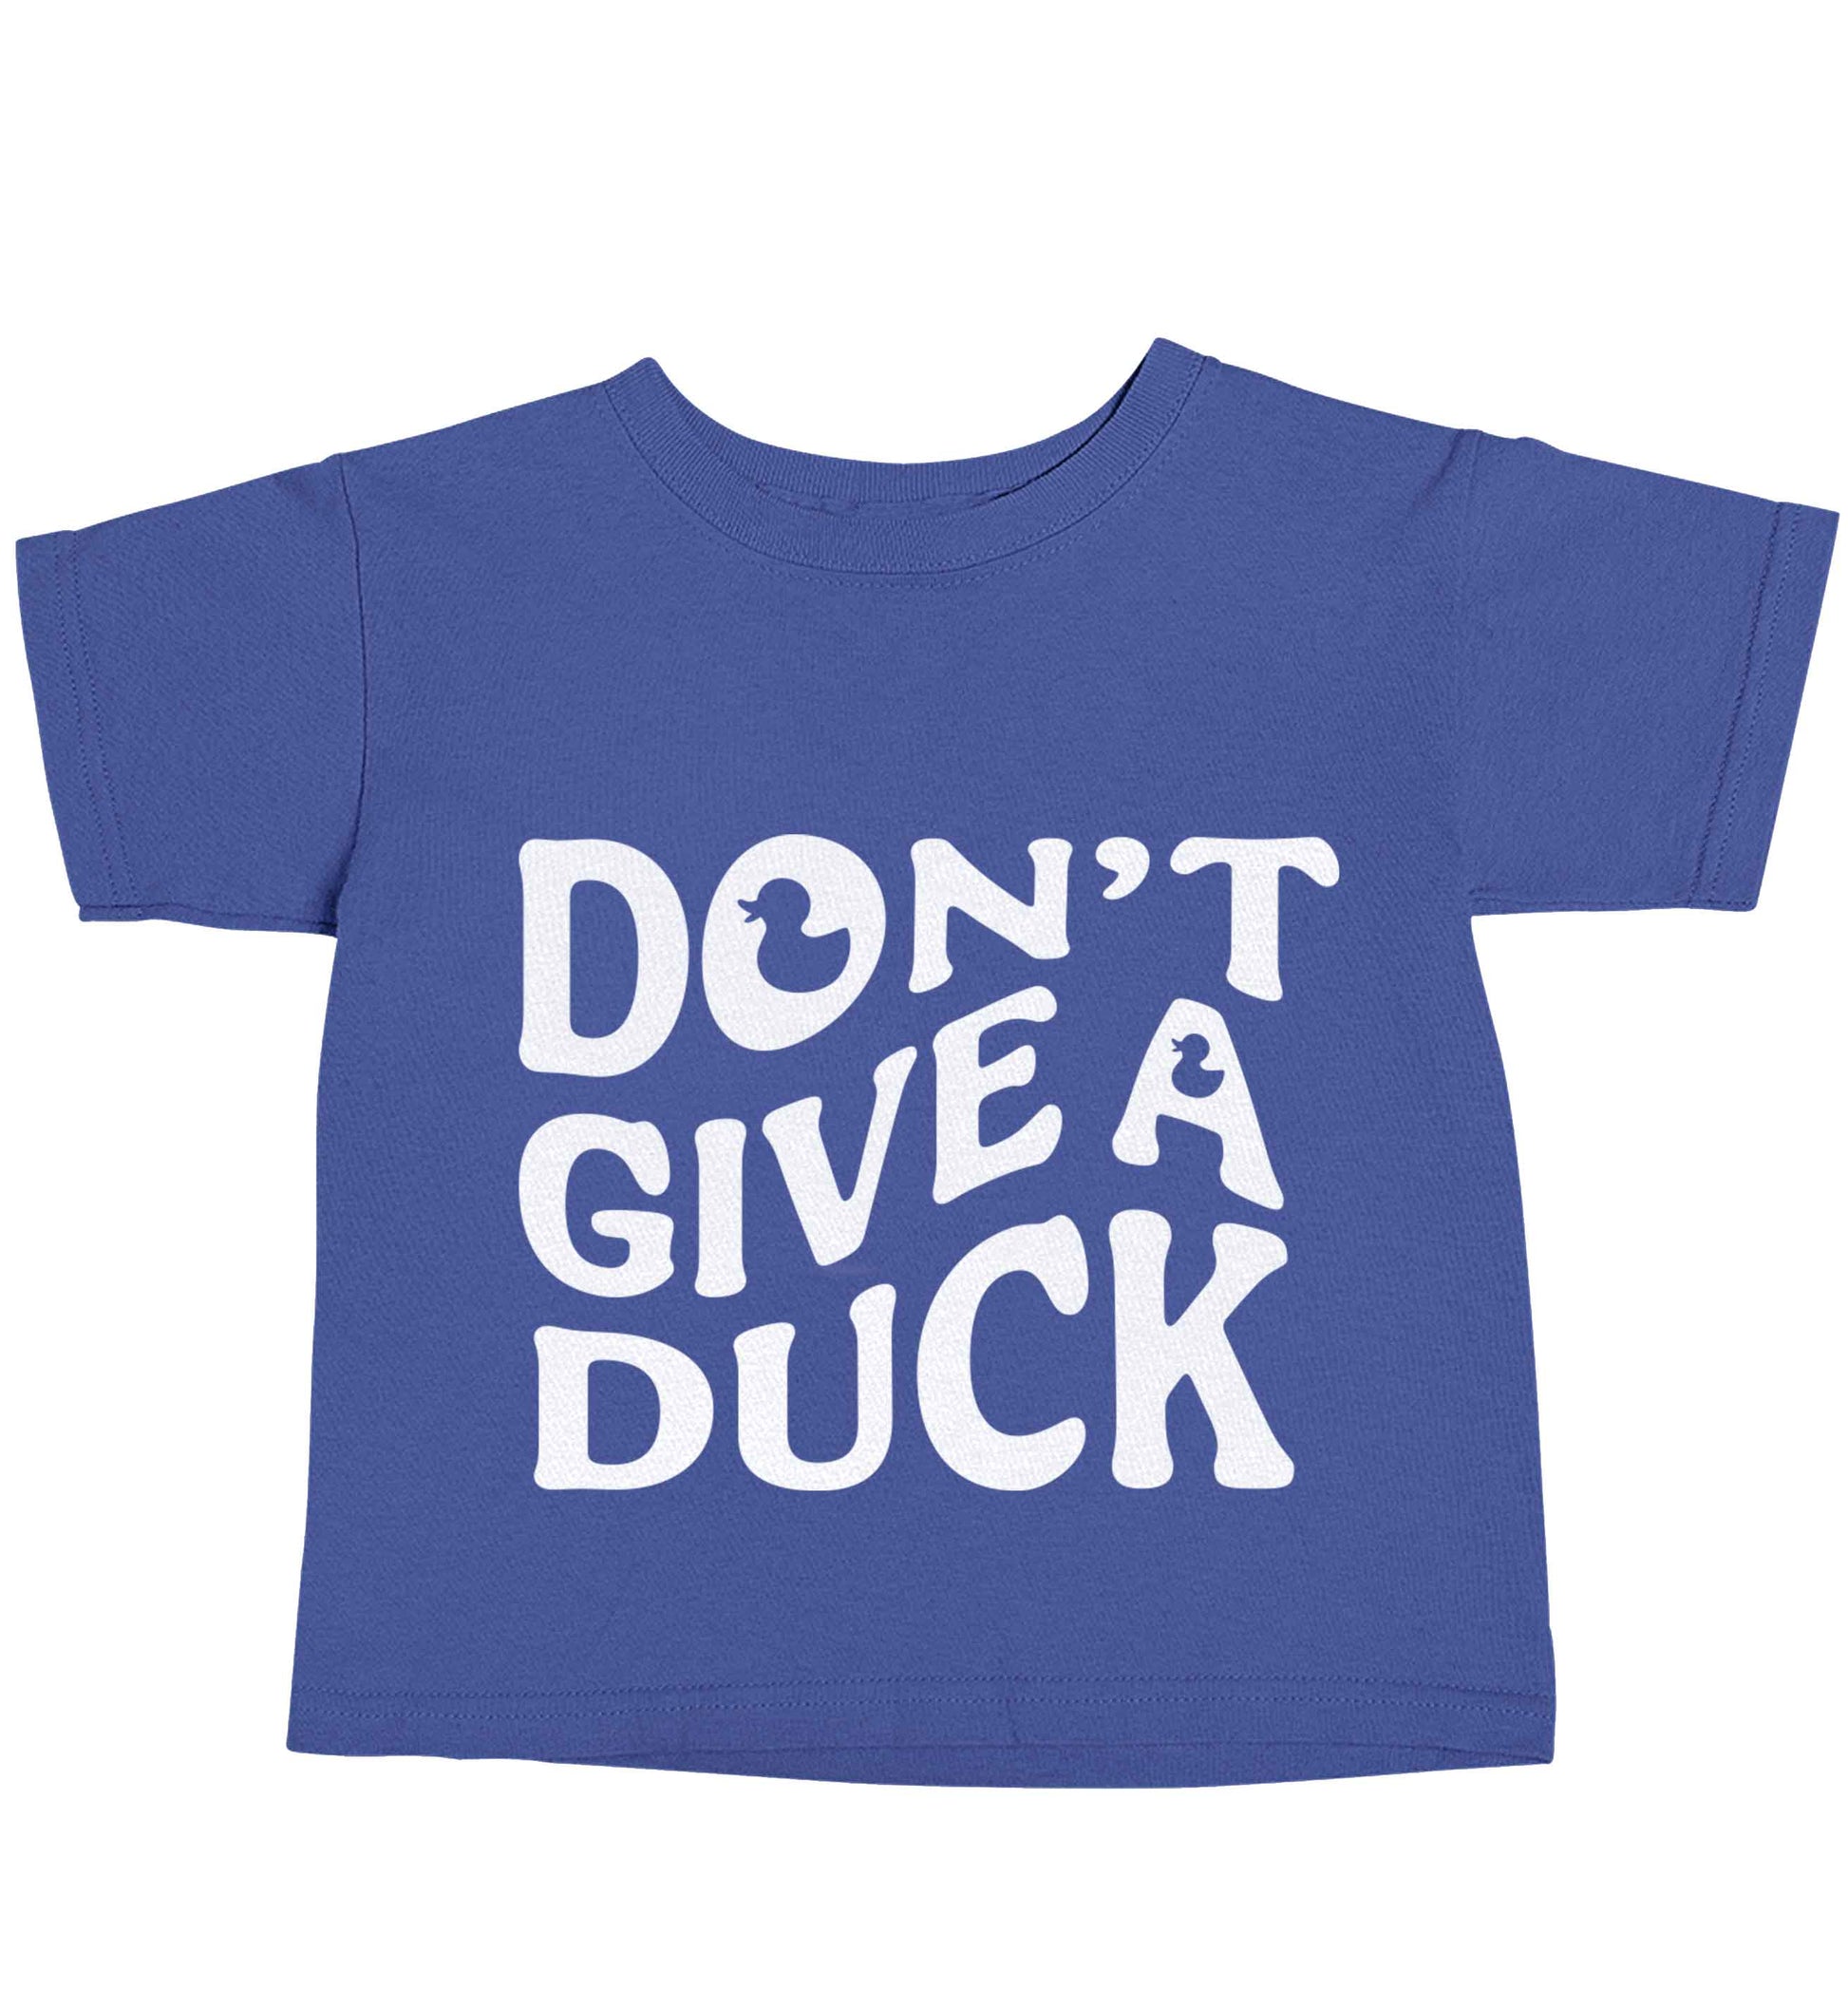 Don't give a duck blue baby toddler Tshirt 2 Years